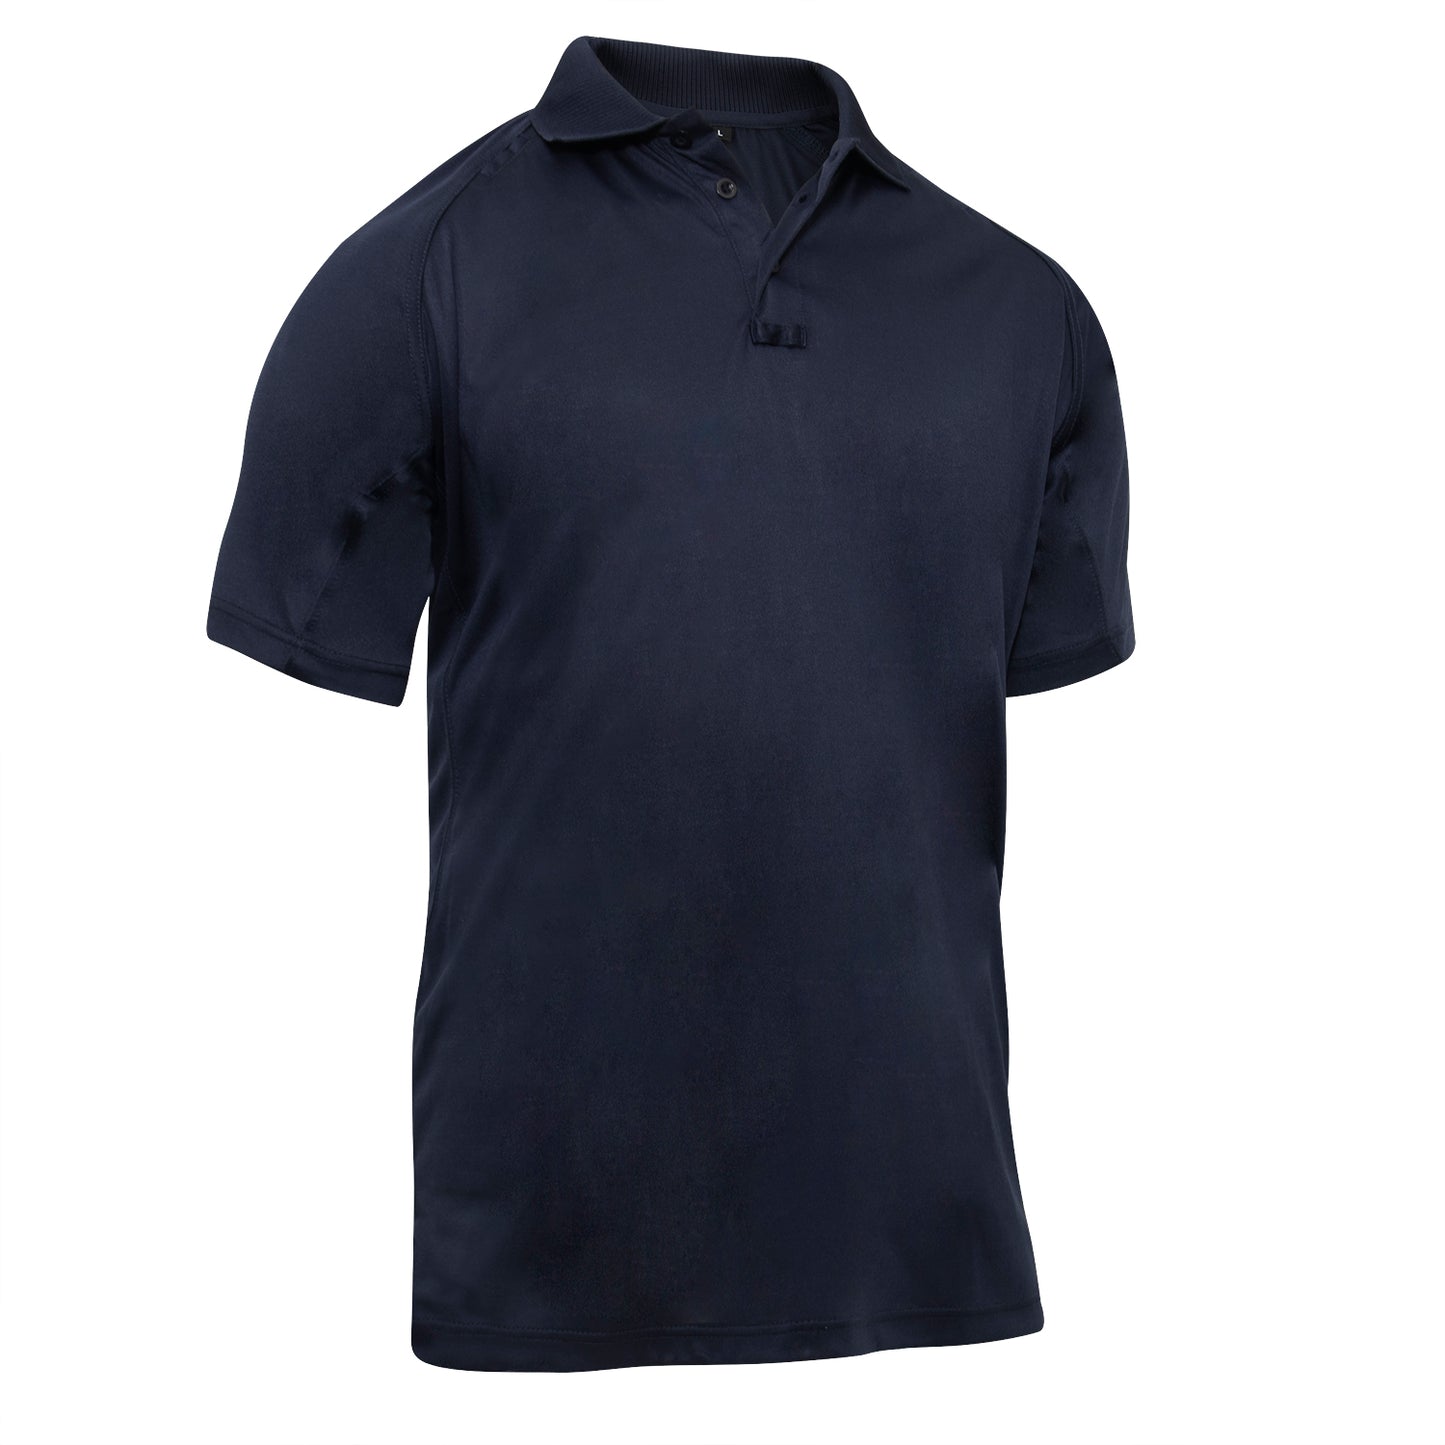 Men's On Duty Tactical Performance Polo Shirt by Rothco